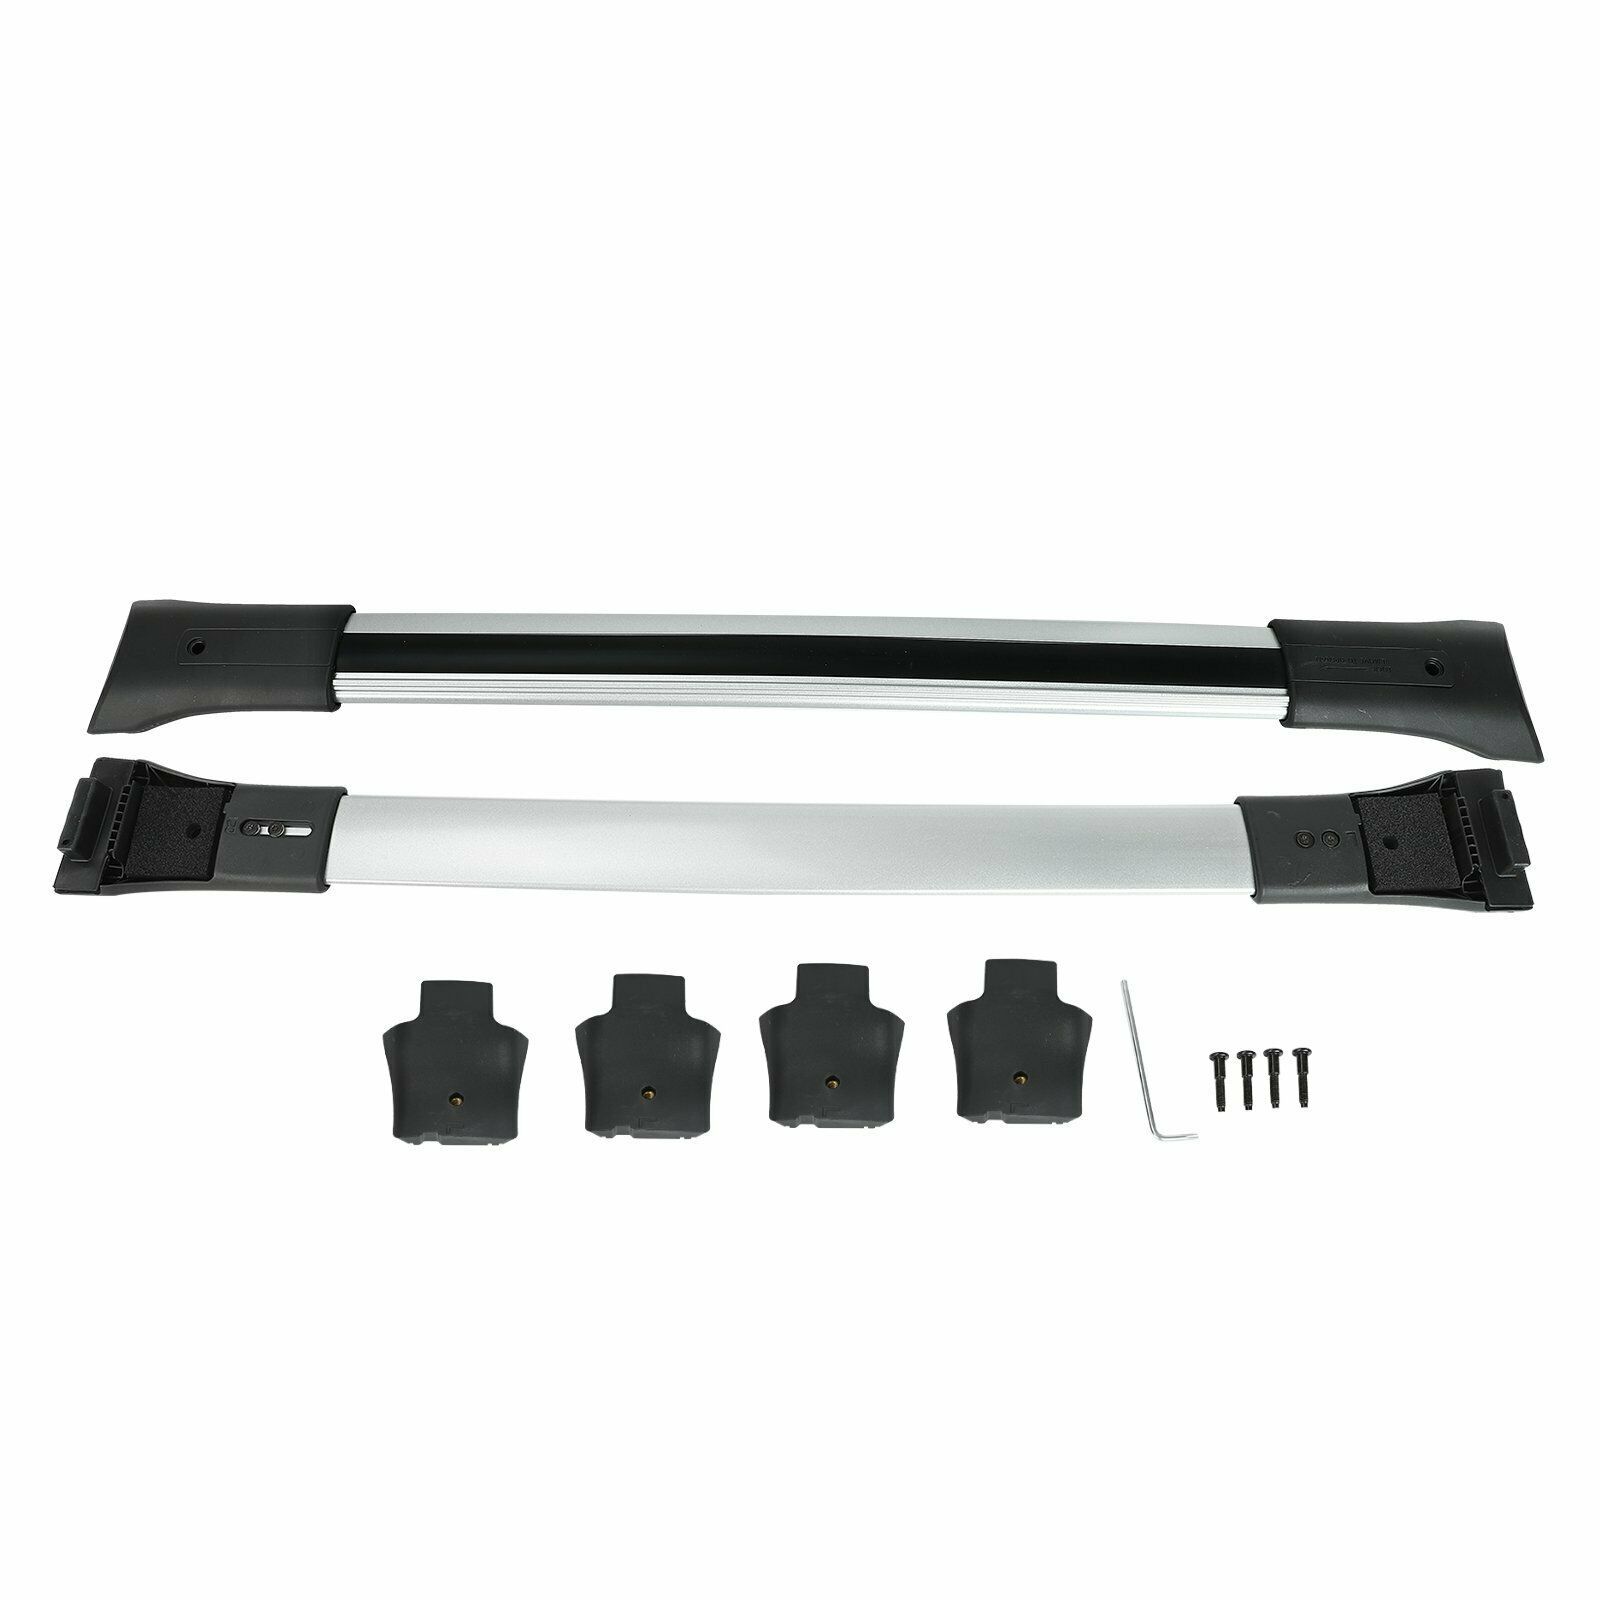 Roof Rack Cross Rail Package Silver 84130842 Fits For GMC Acadia GM 2010-2017